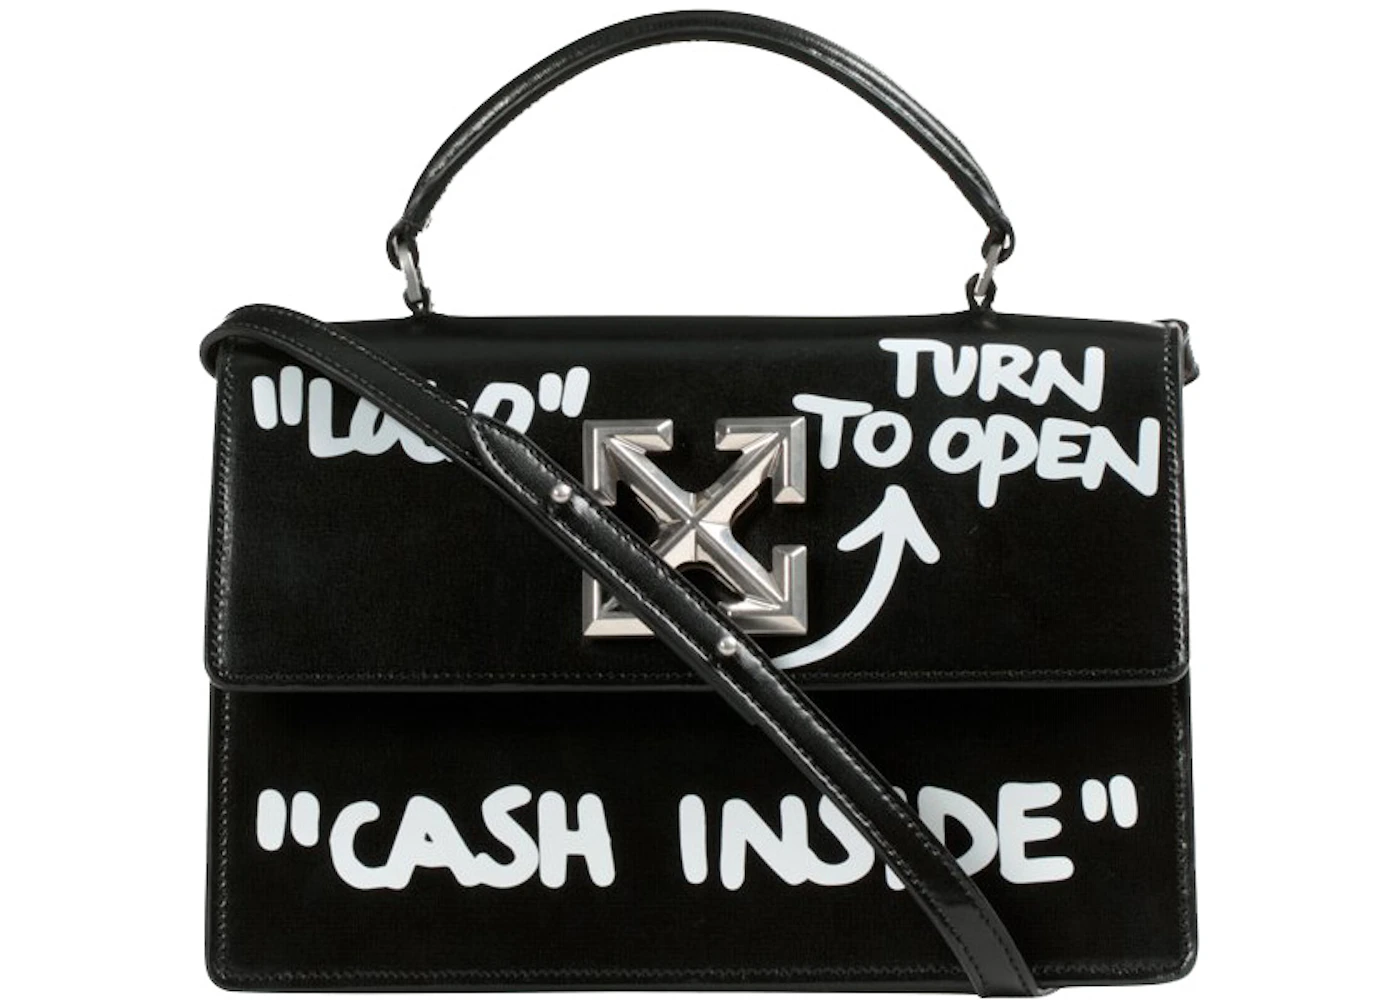 OFF-WHITE 1.4 Jitney Bag CASH INSIDE Black White in Leather with